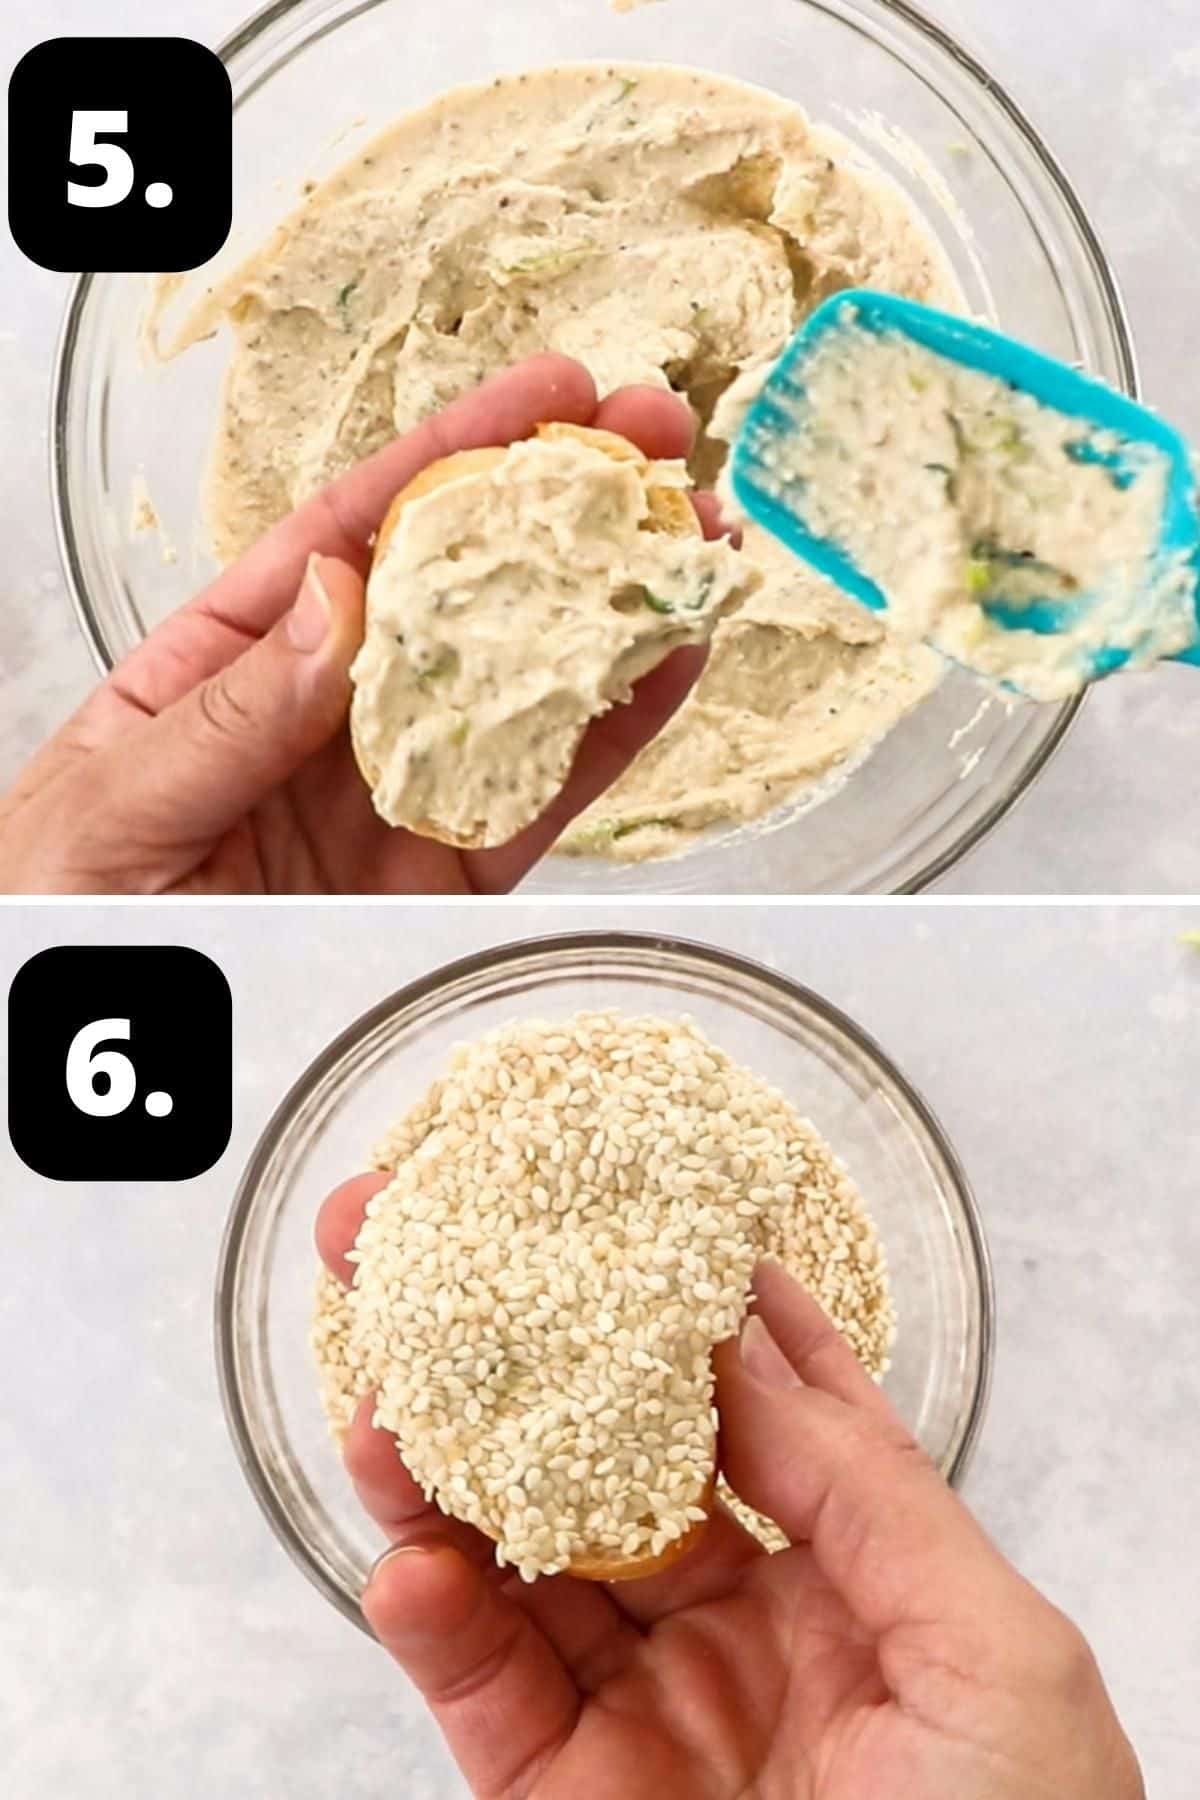 Steps 5-6 of preparing this recipe - spreading the tofu mixture onto the bread and topping with sesame seeds.